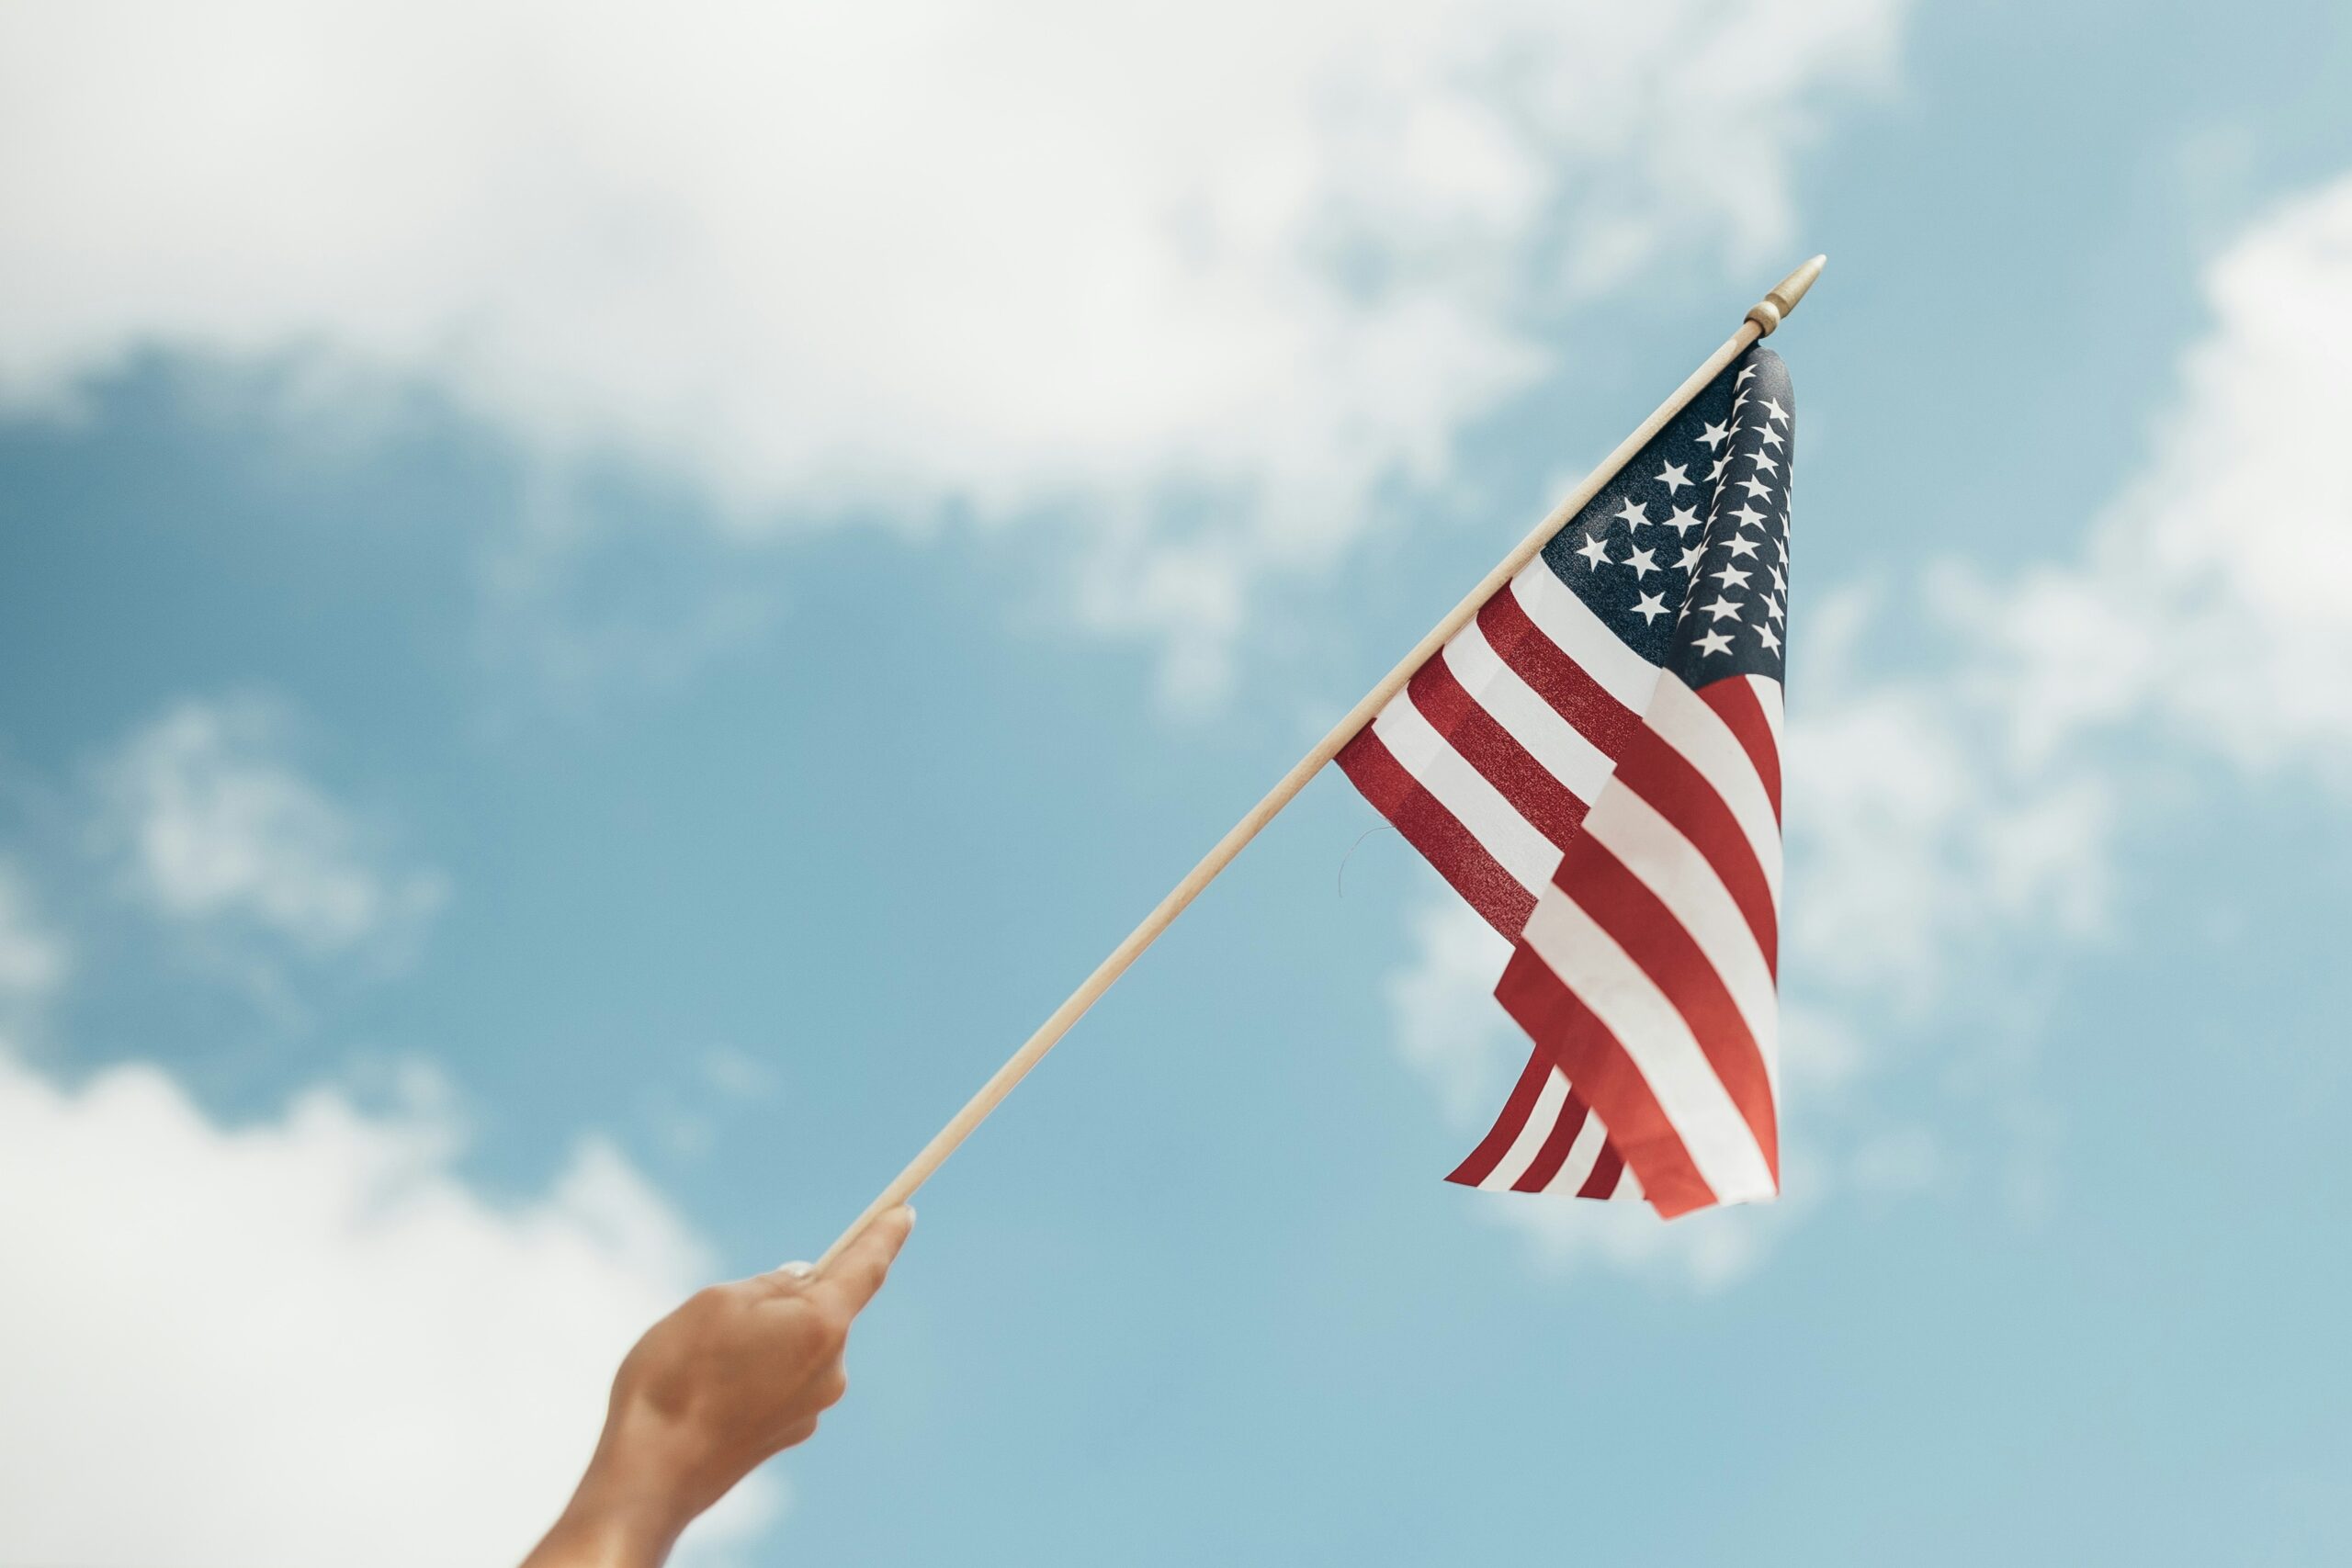 “Celebrating Independence: July 4th as an Analogy for Business Success” by Marshall Krupp